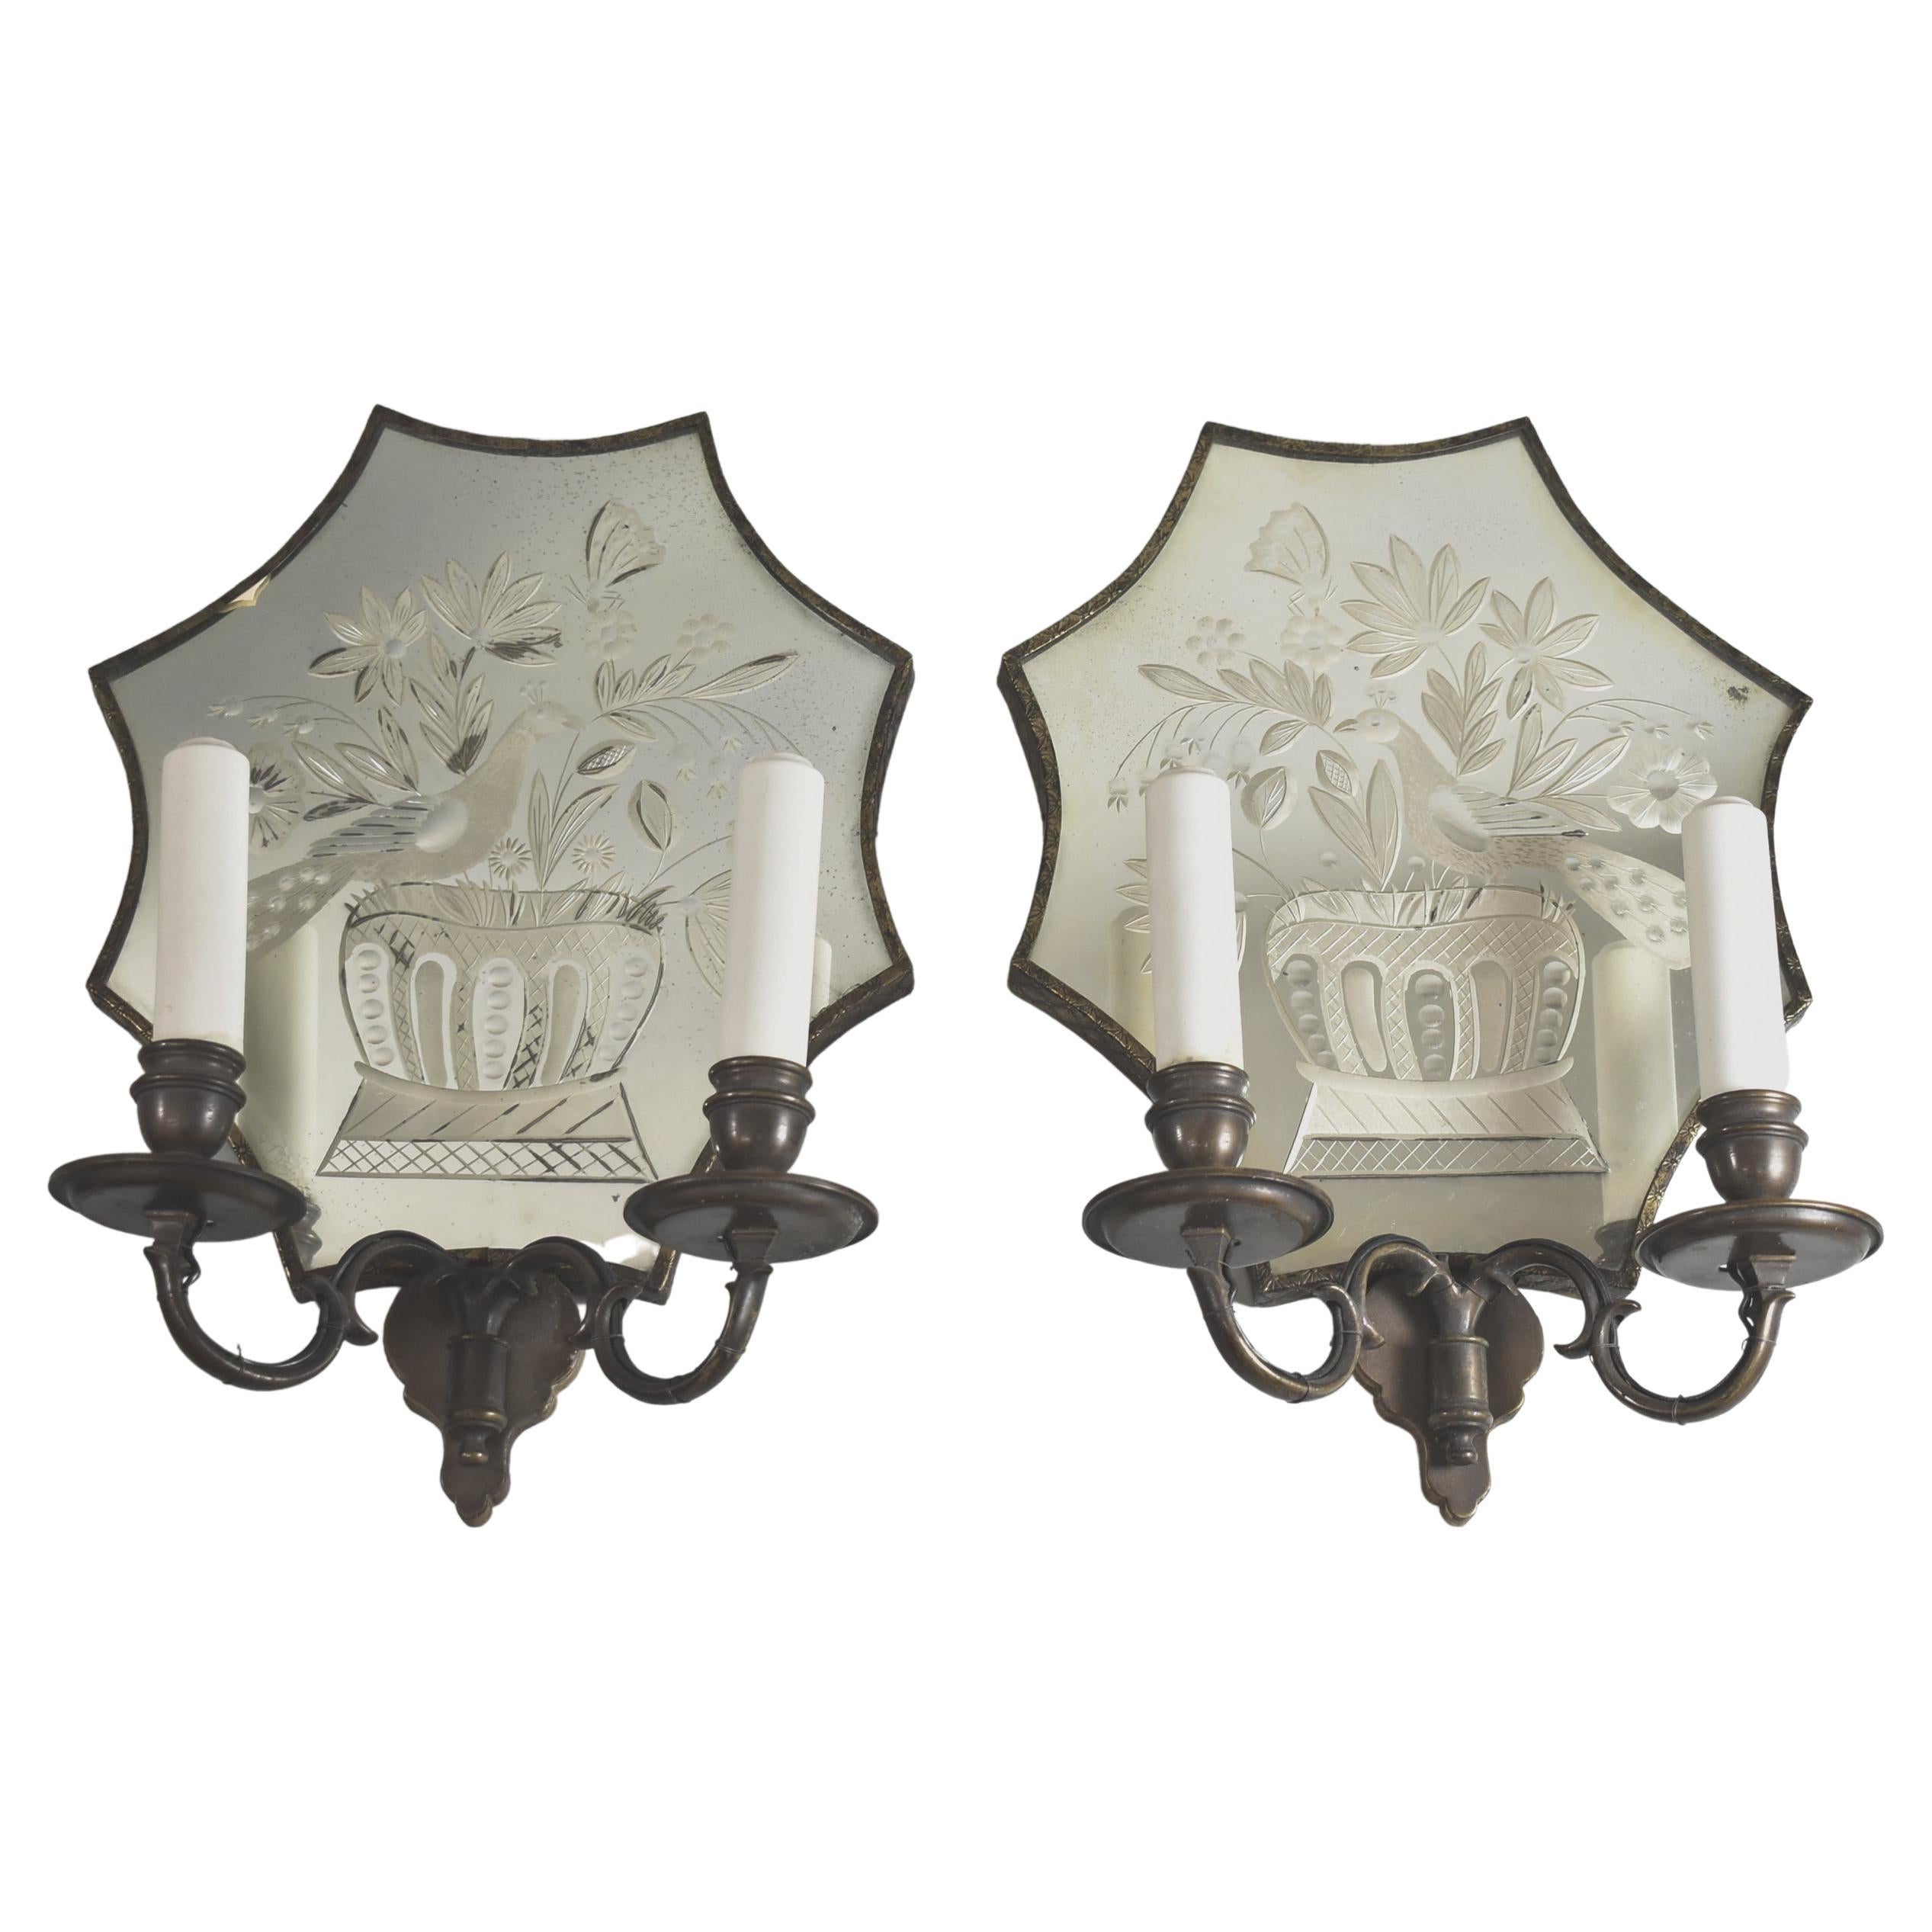 Pair of Edward Caldwell Etched Peacock and Floral Mirrored Bronze Sconces